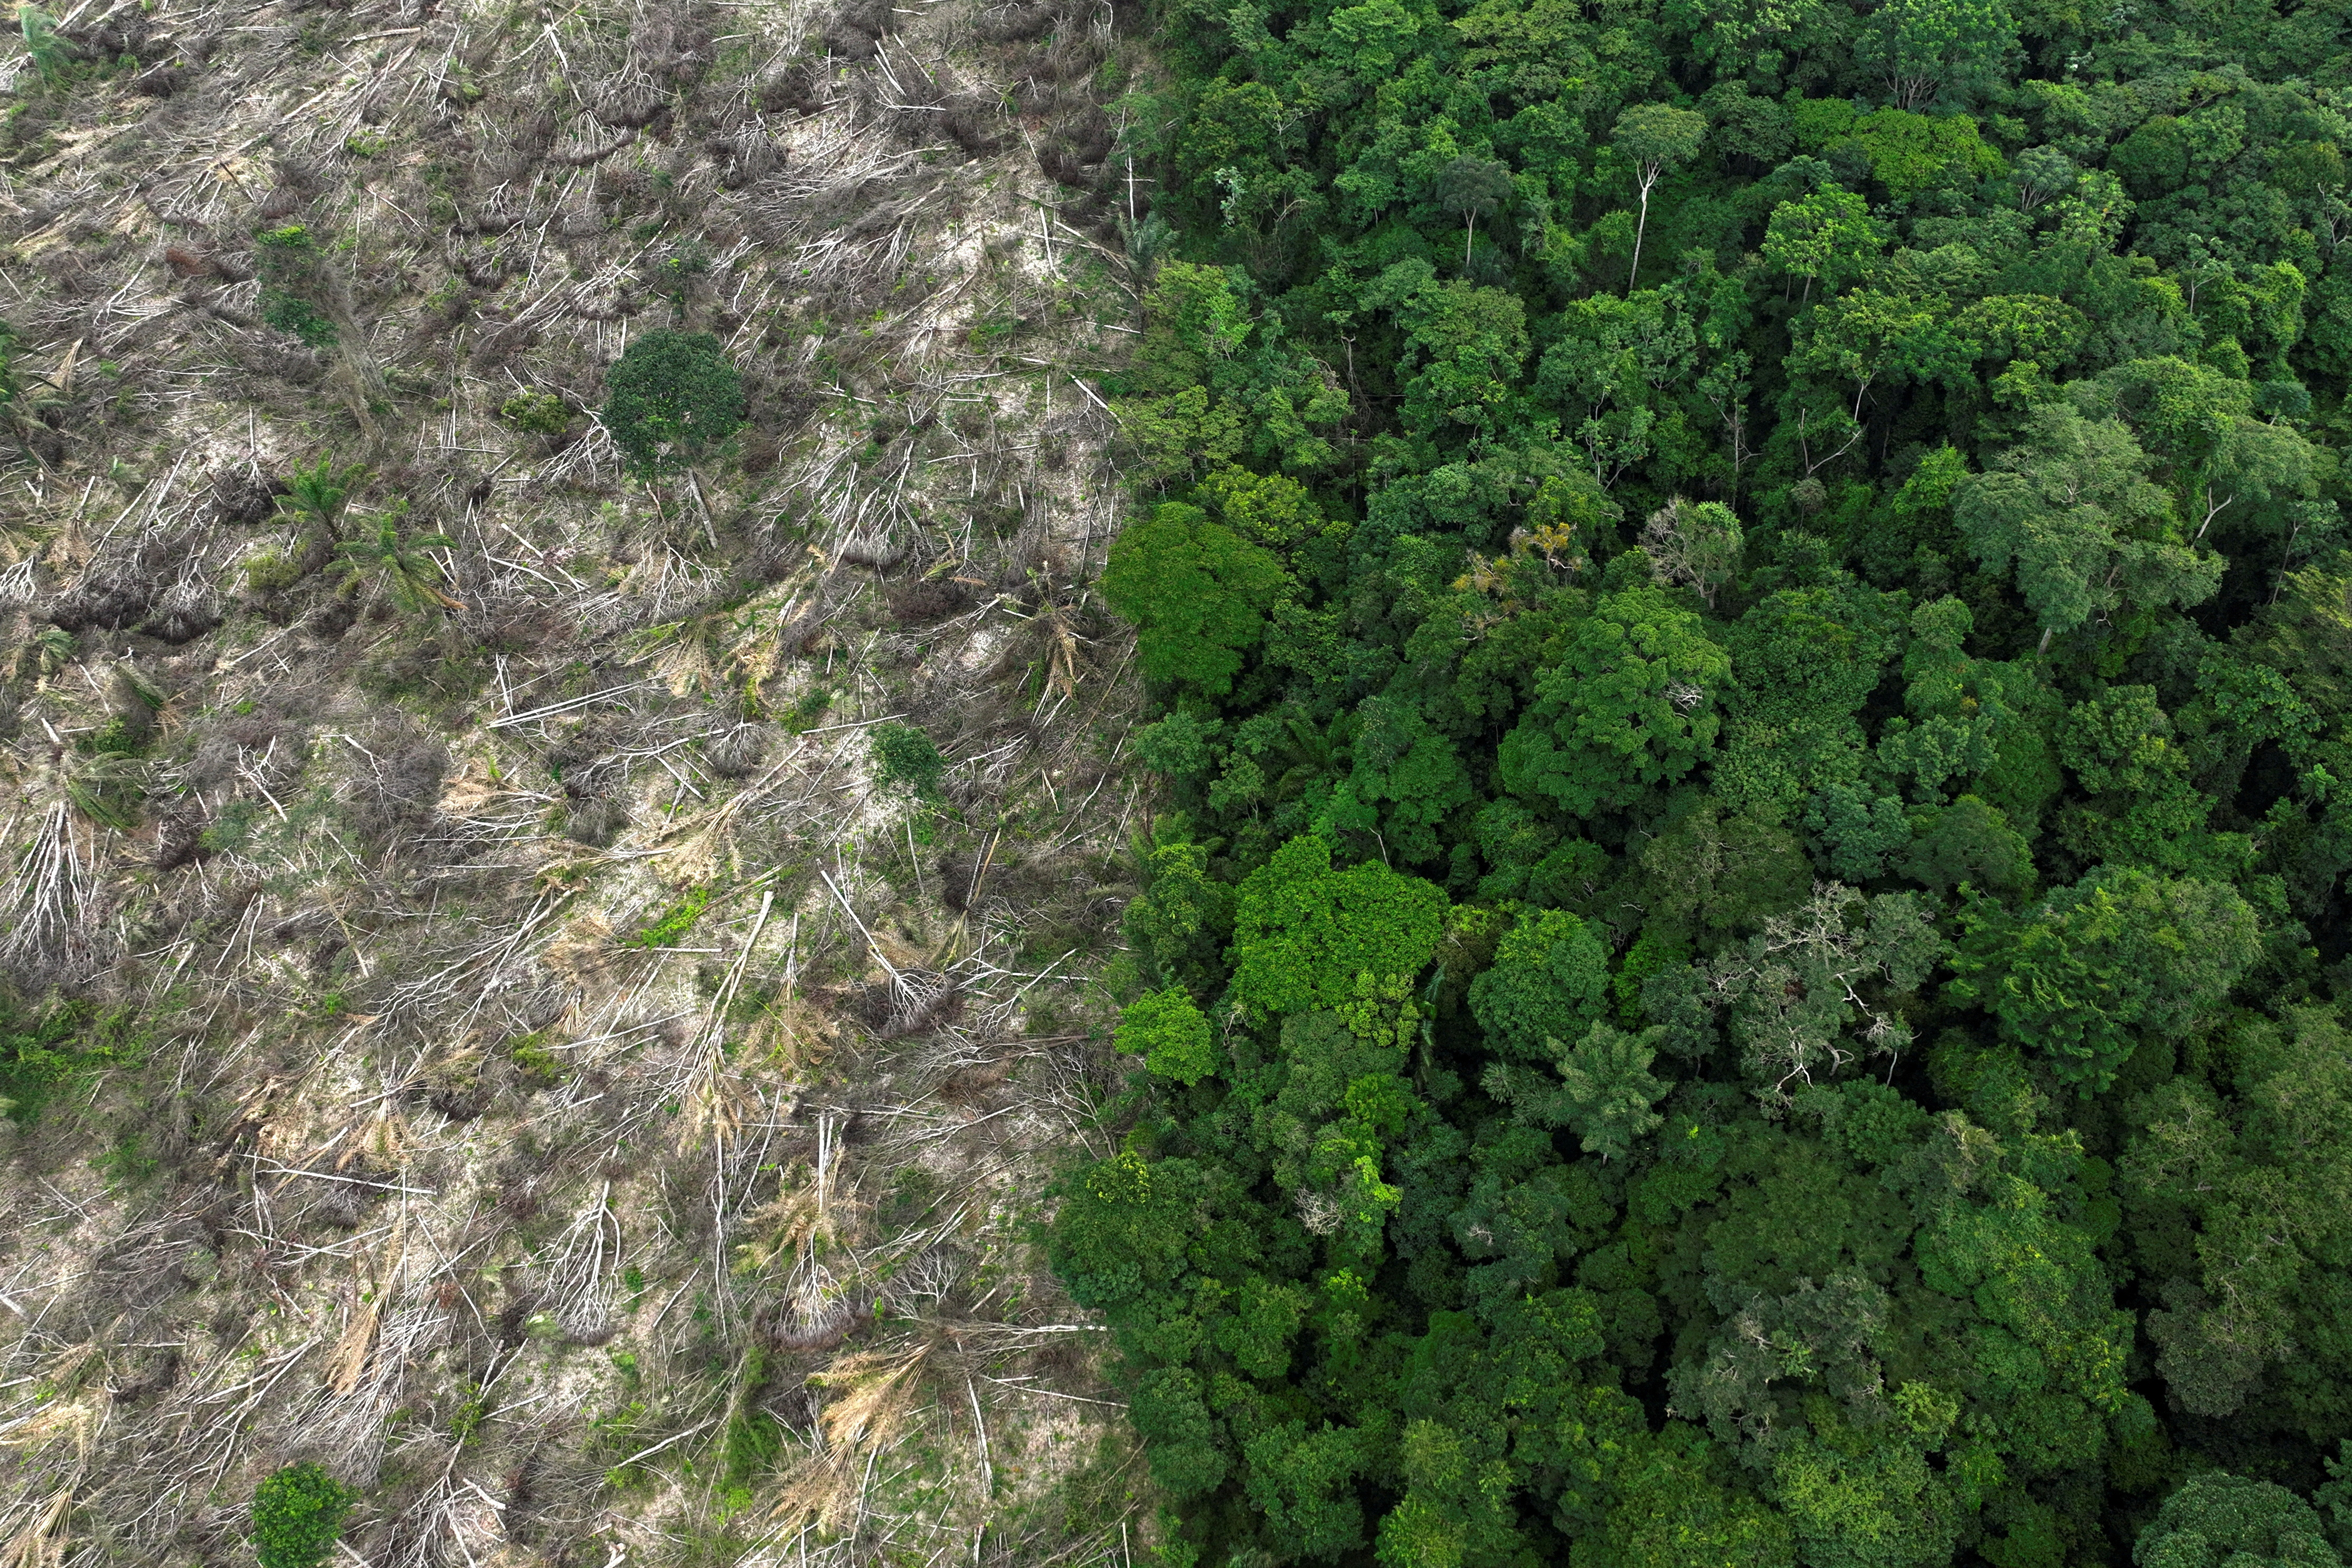 A new EU law will require importers of certain food products and palm oil to show supply chains aren't destroying forests. /Ueslei Marcelino/Reuters